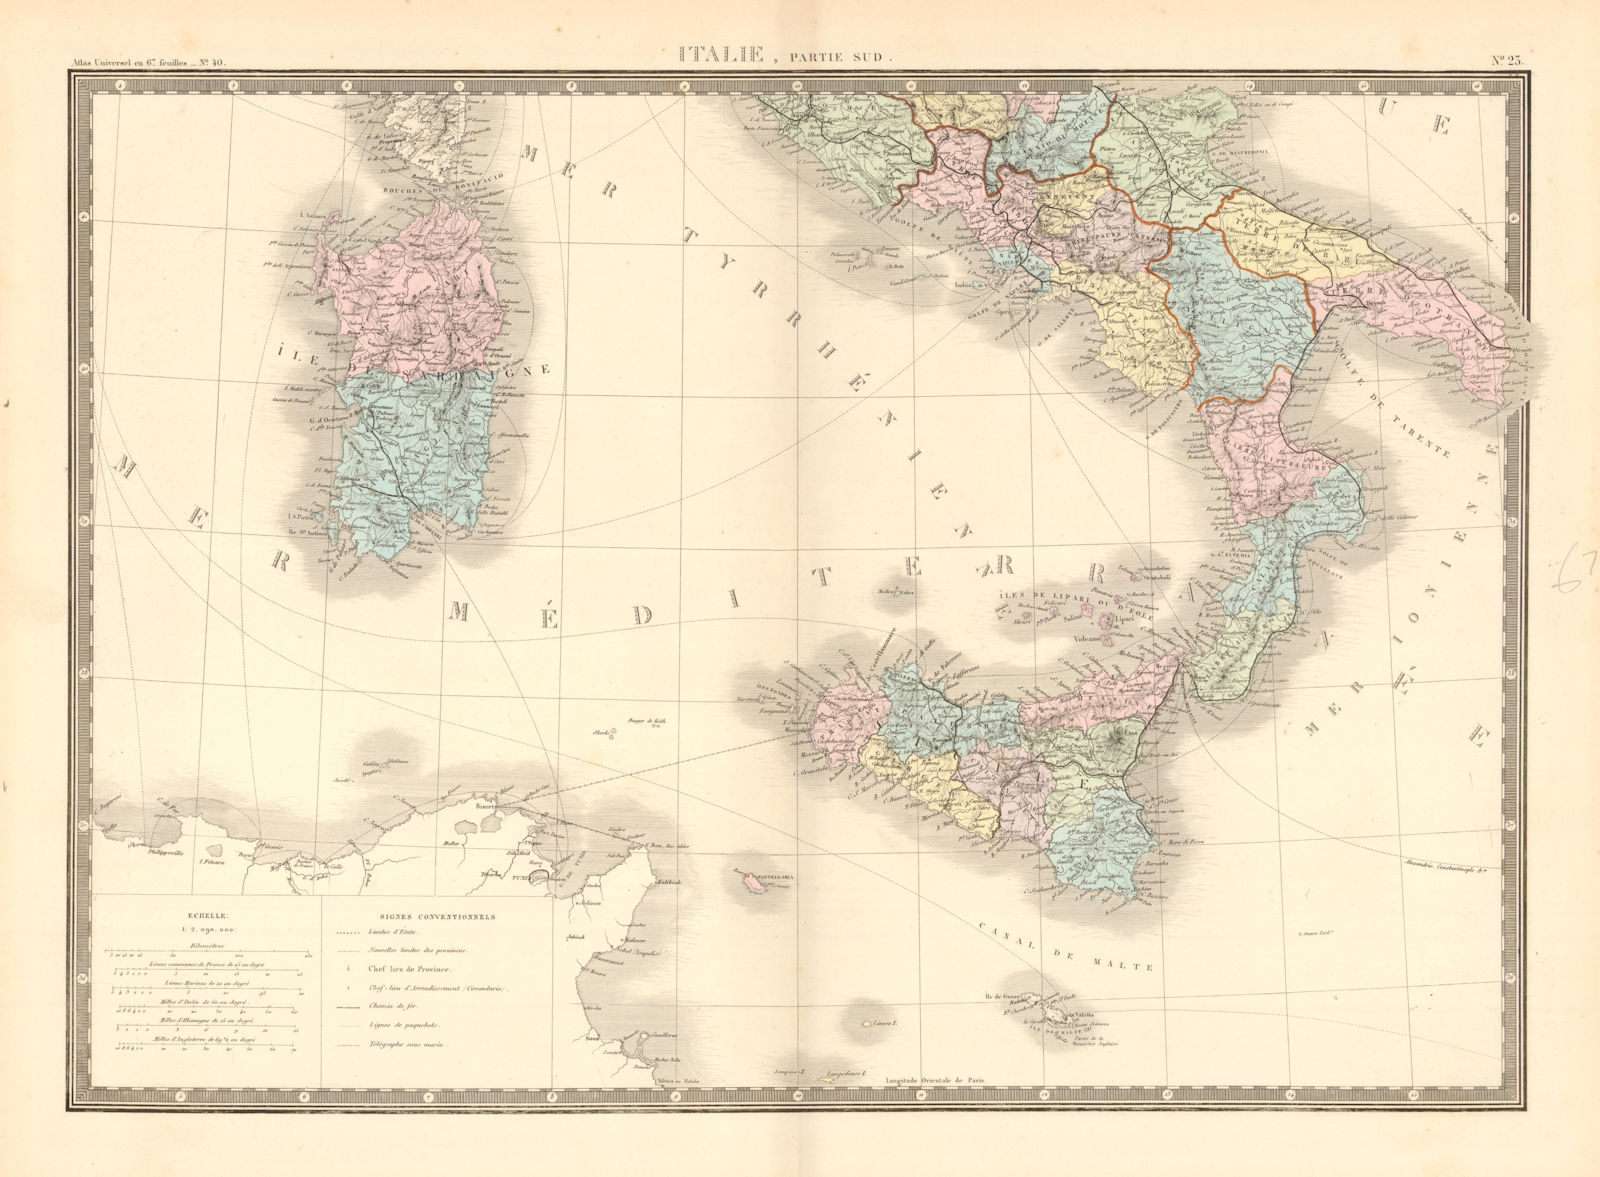 Associate Product 'Italie, partie sud' by A-H Brué. Southern Italy Sicily Sardinia 1875 old map